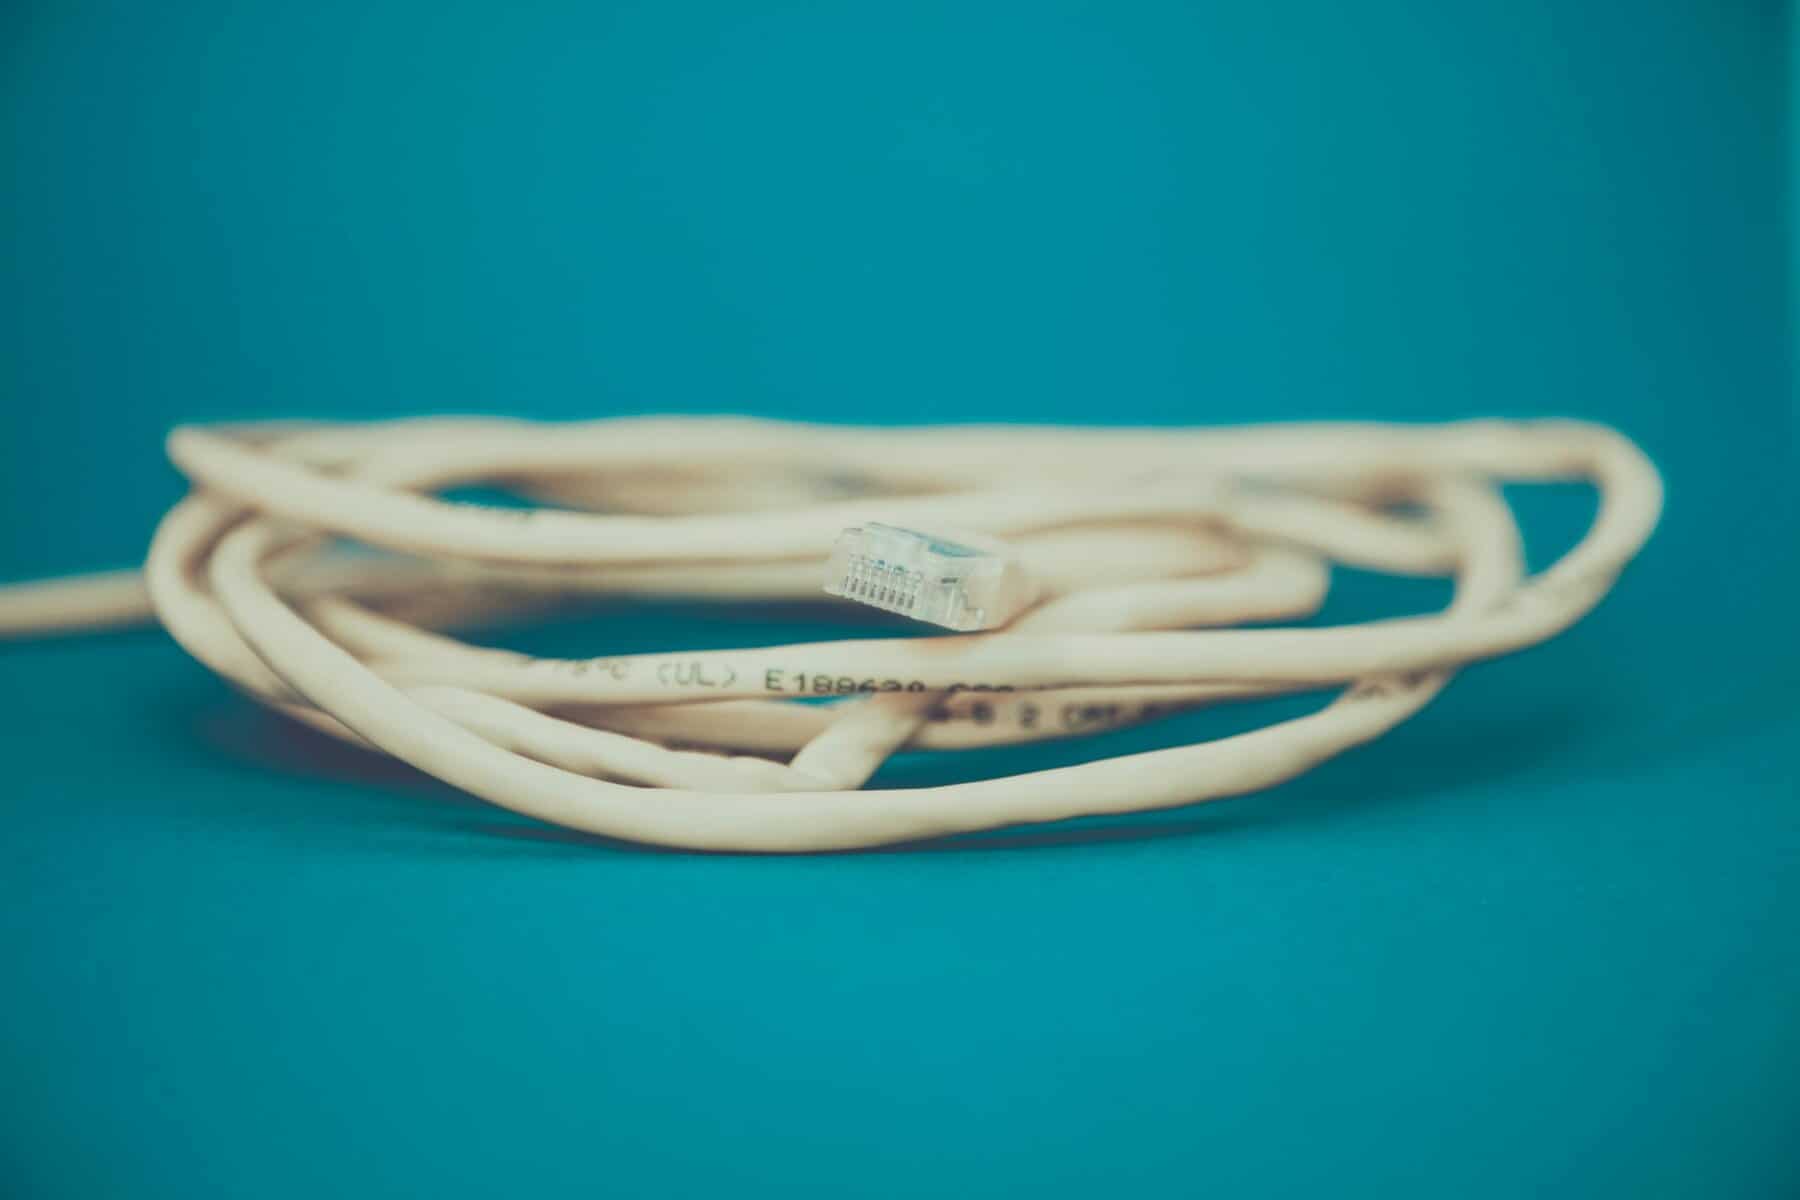 Cat 5 vs Cat 6 ethernet cables: What You Need to Know - UBB